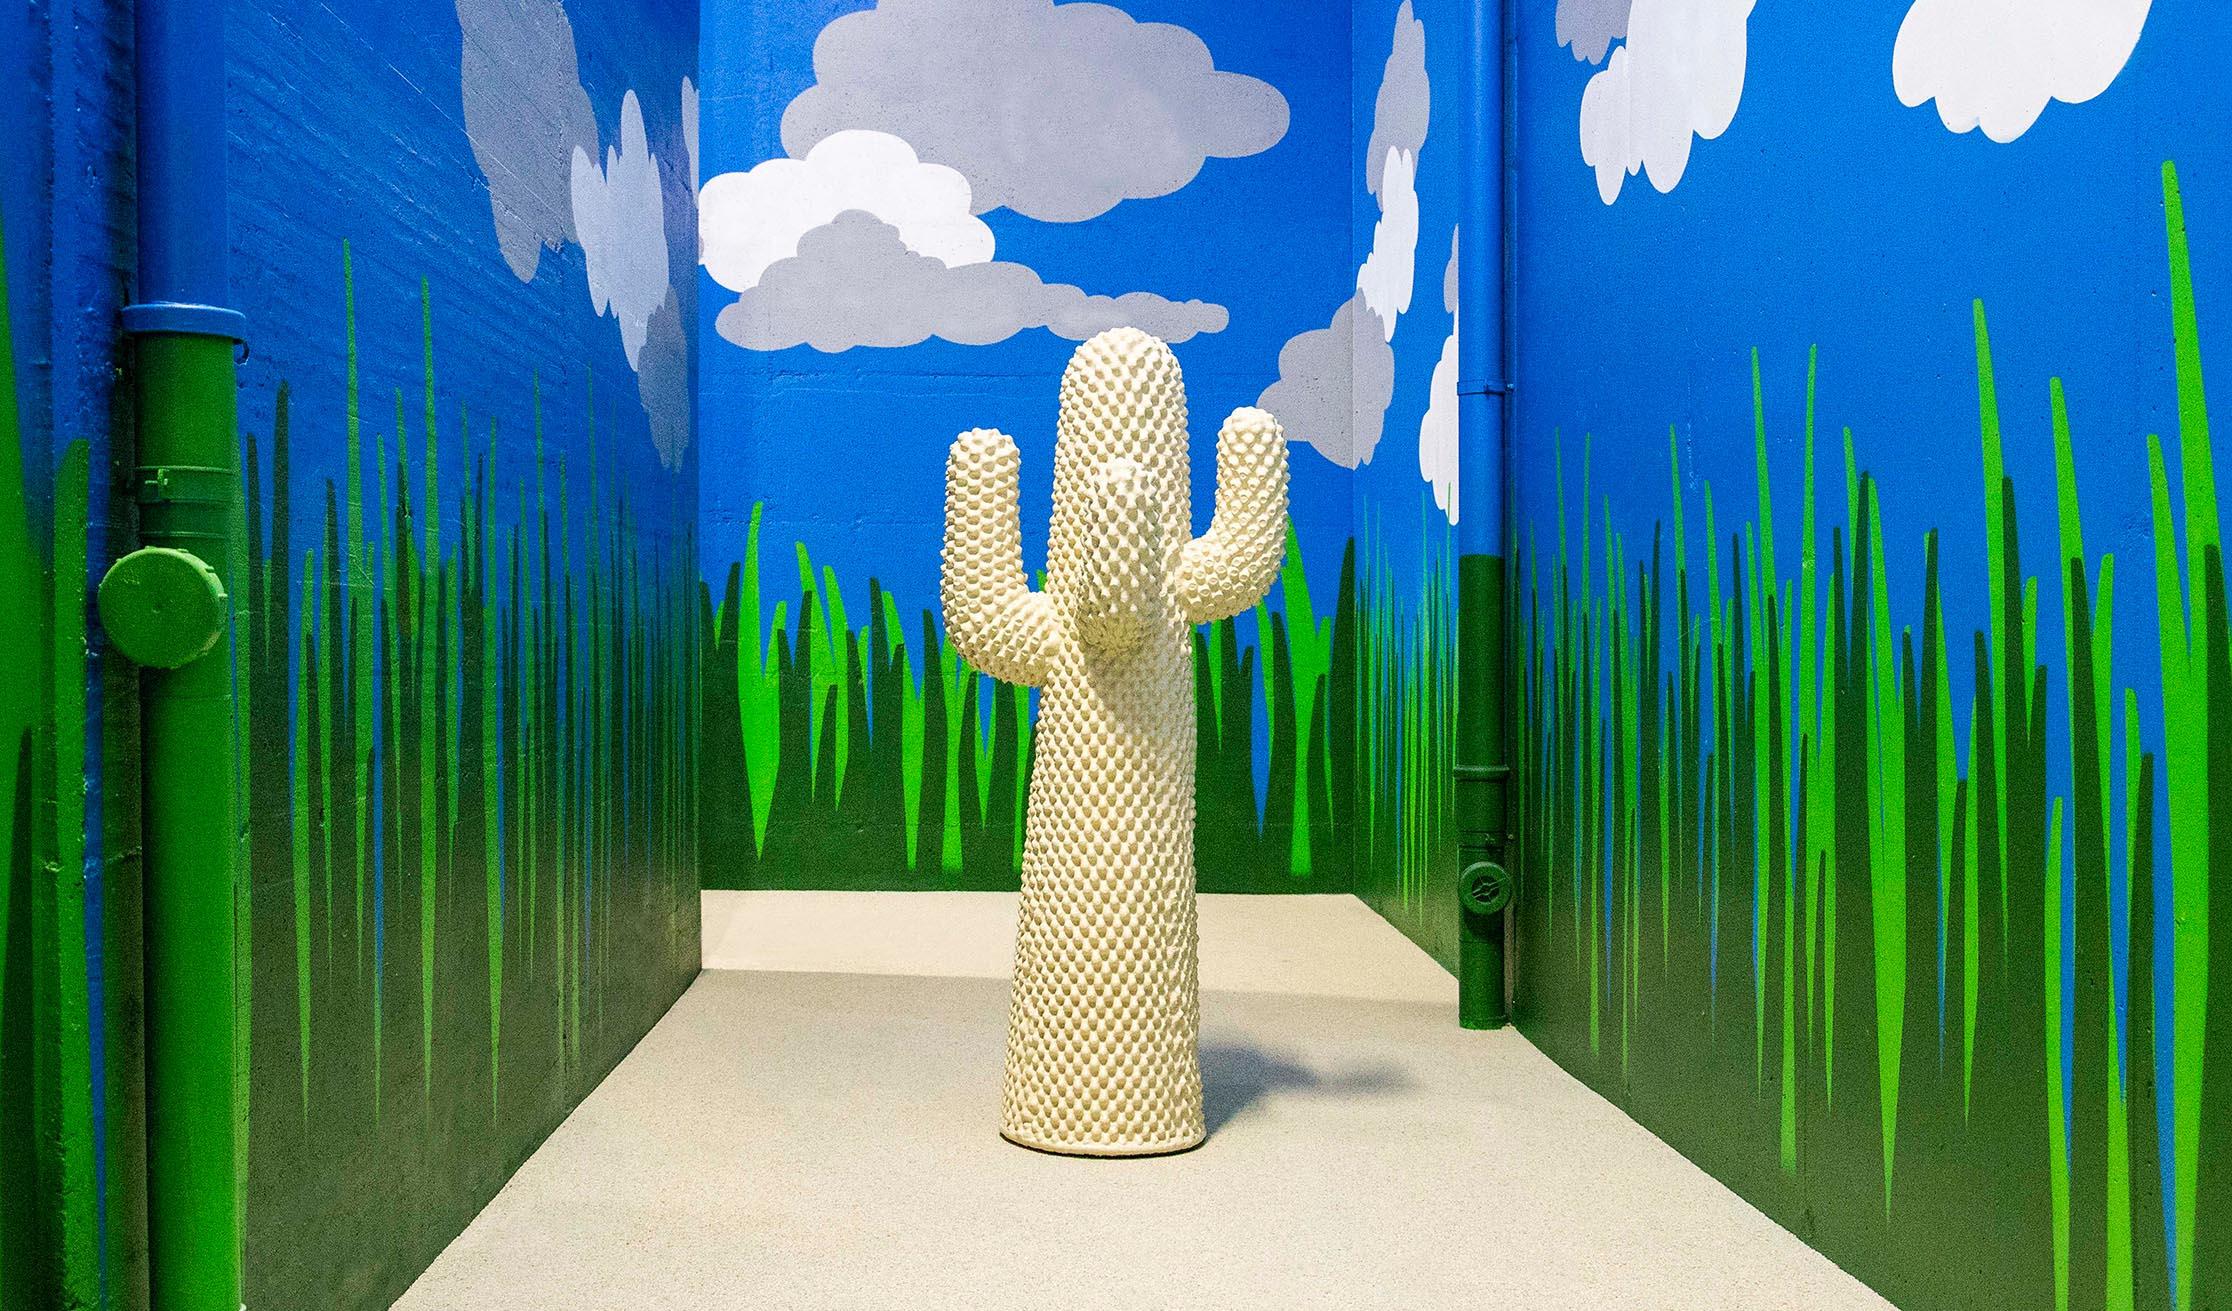 The subject of several, free and often ambiguous interpretations, Cactus is the icon of Italian design that has revolutionized the domestic landscape, by subverting the borders between indoor area and open space. Cactus comes as an ironic totem, and